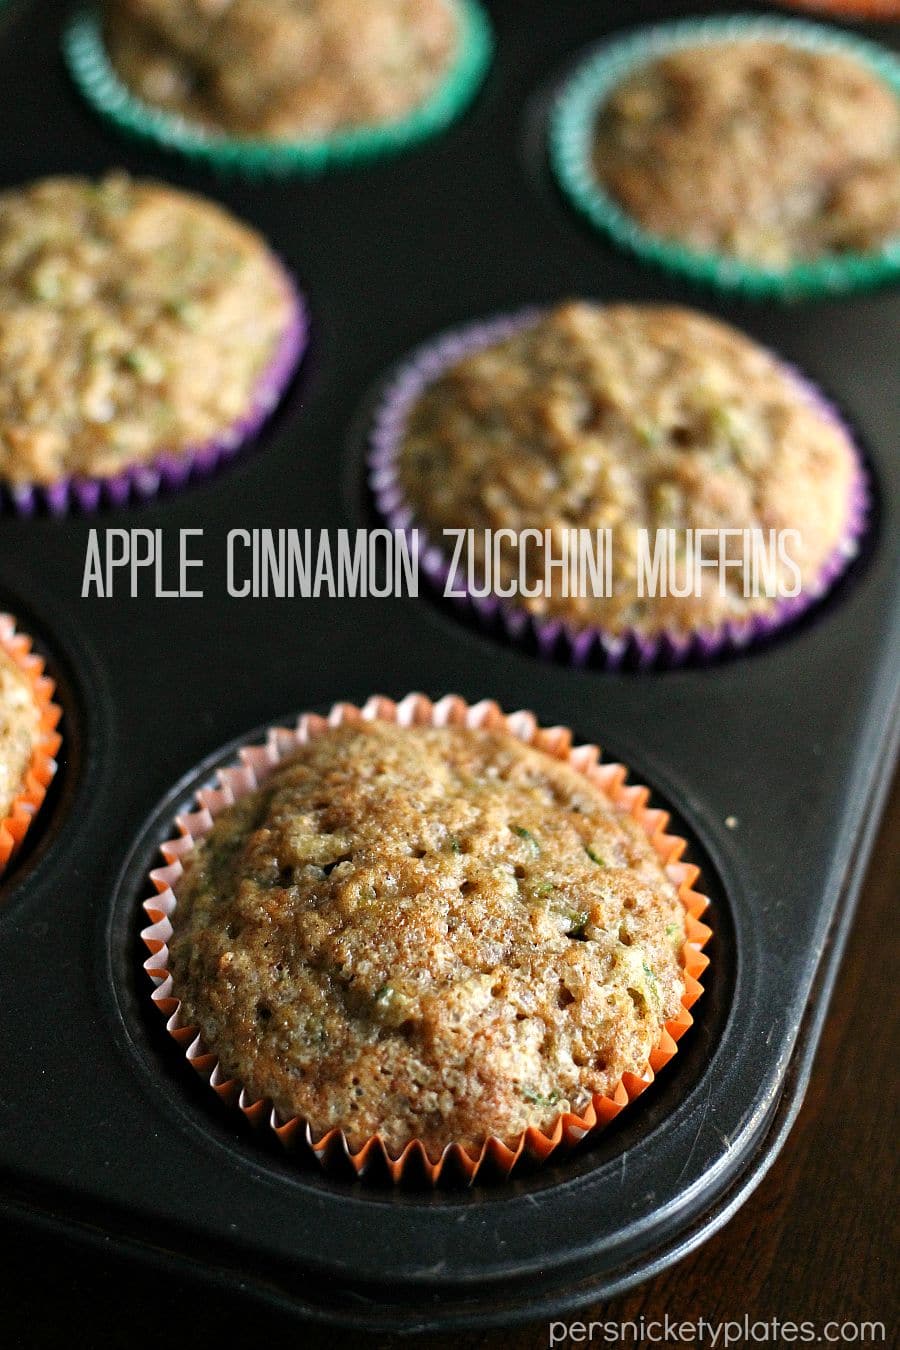 pan of muffins with text overlay reading "apple cinnamon zucchini muffins".